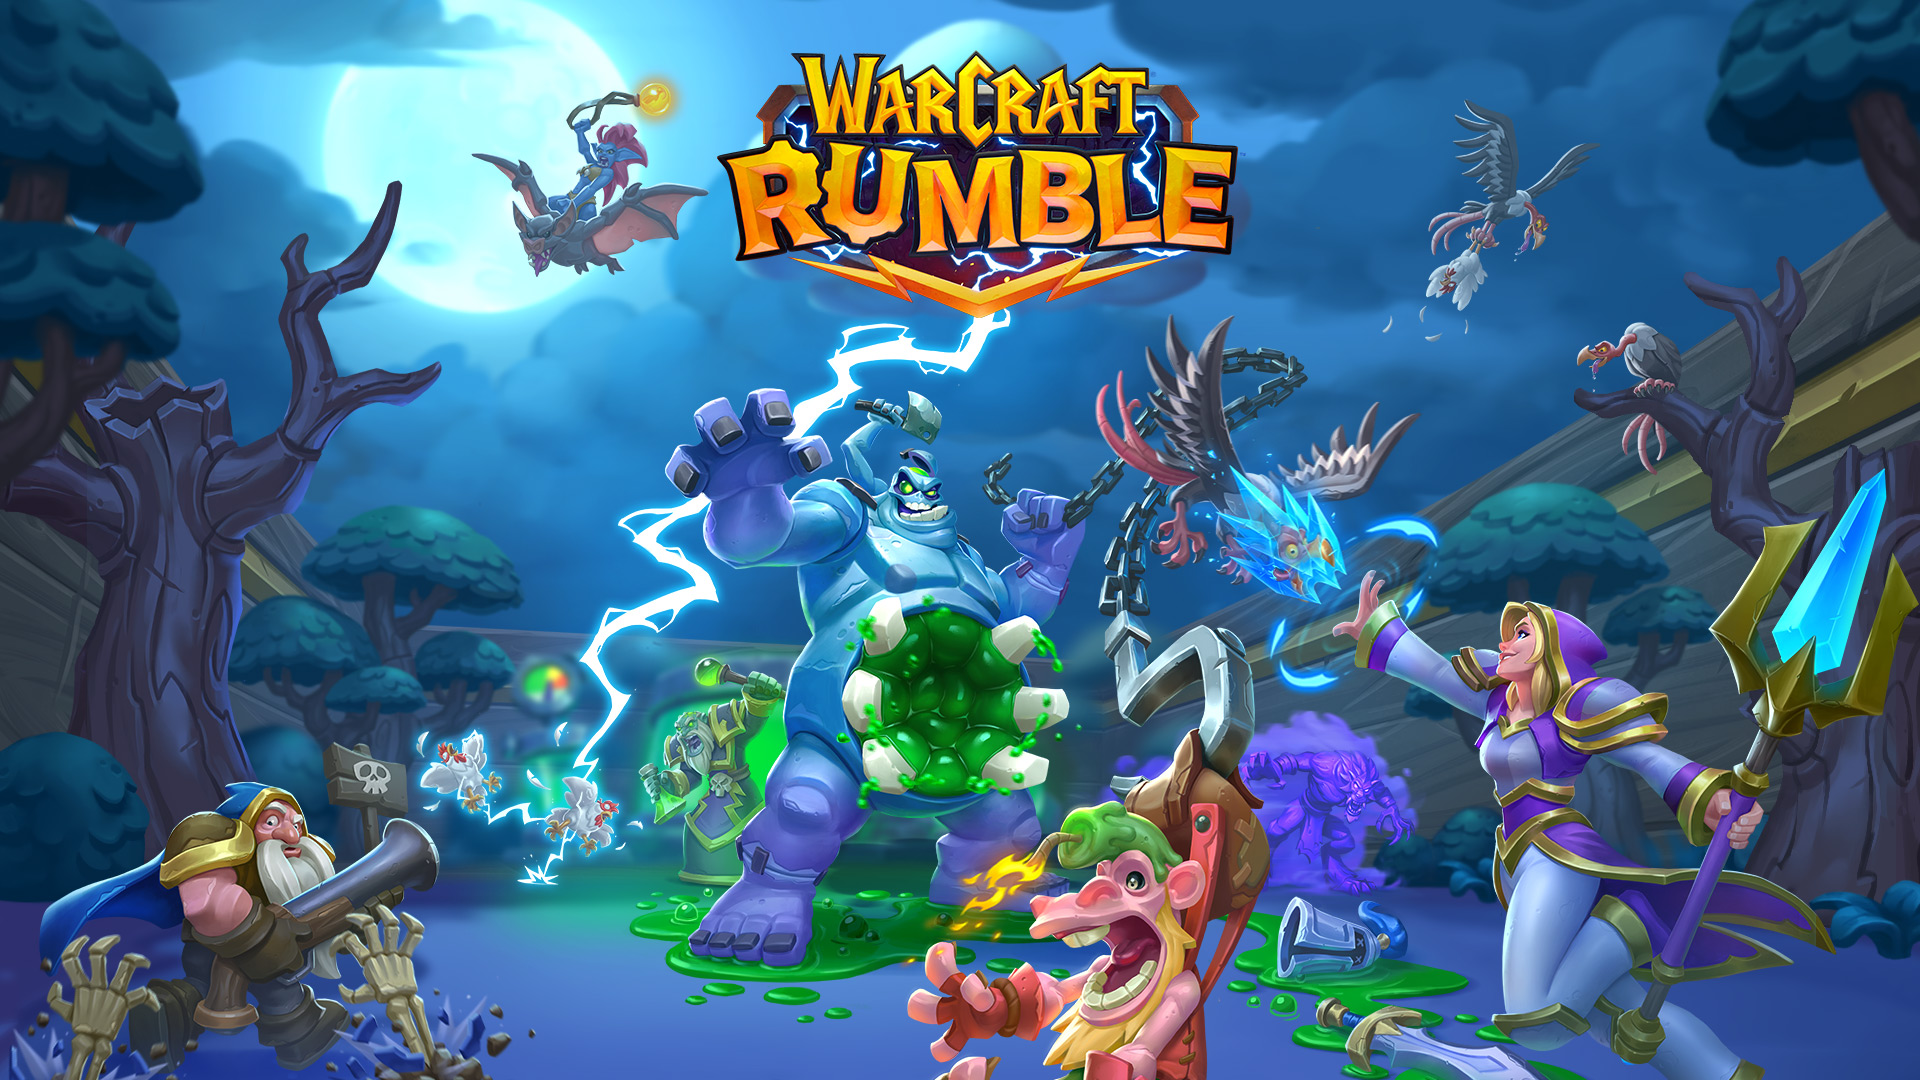 Warcraft Rumble is soft launching today